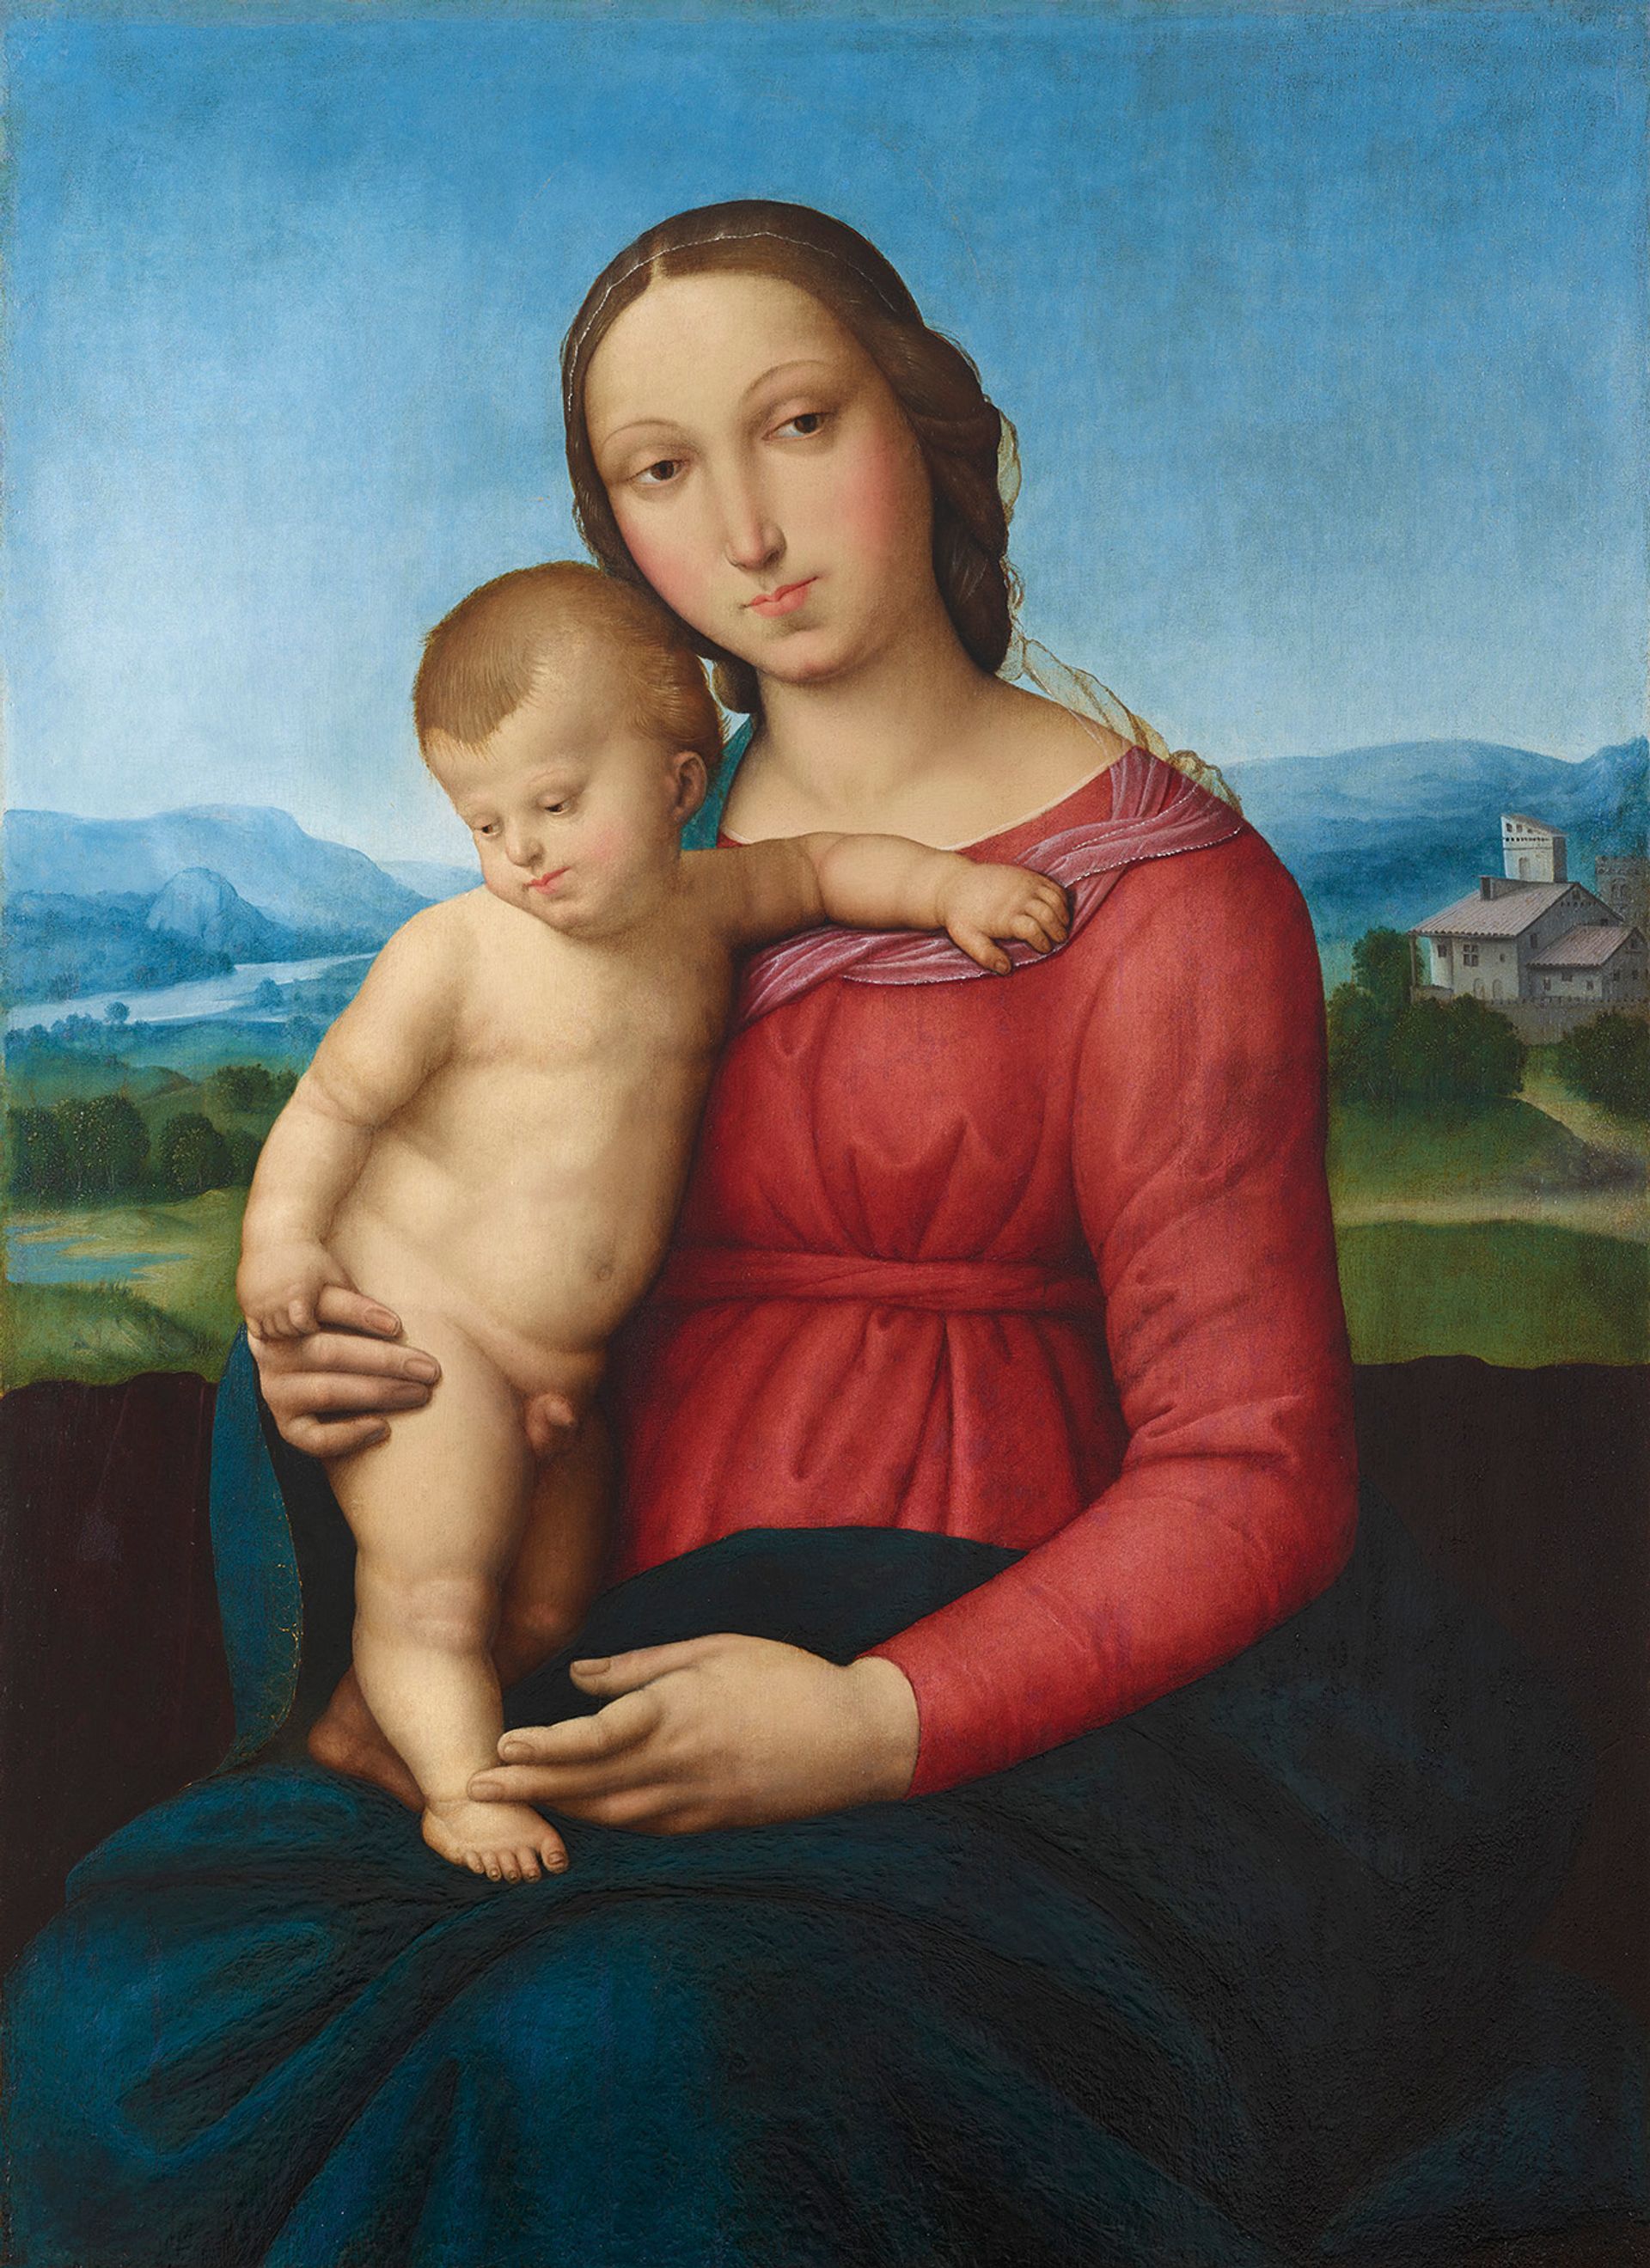 Madonna and Child is described by Dorotheum as being by an associate of Raffaello Sanzio, called Raphael, and is estimated at €300,000-€400,000 © Dorotheum